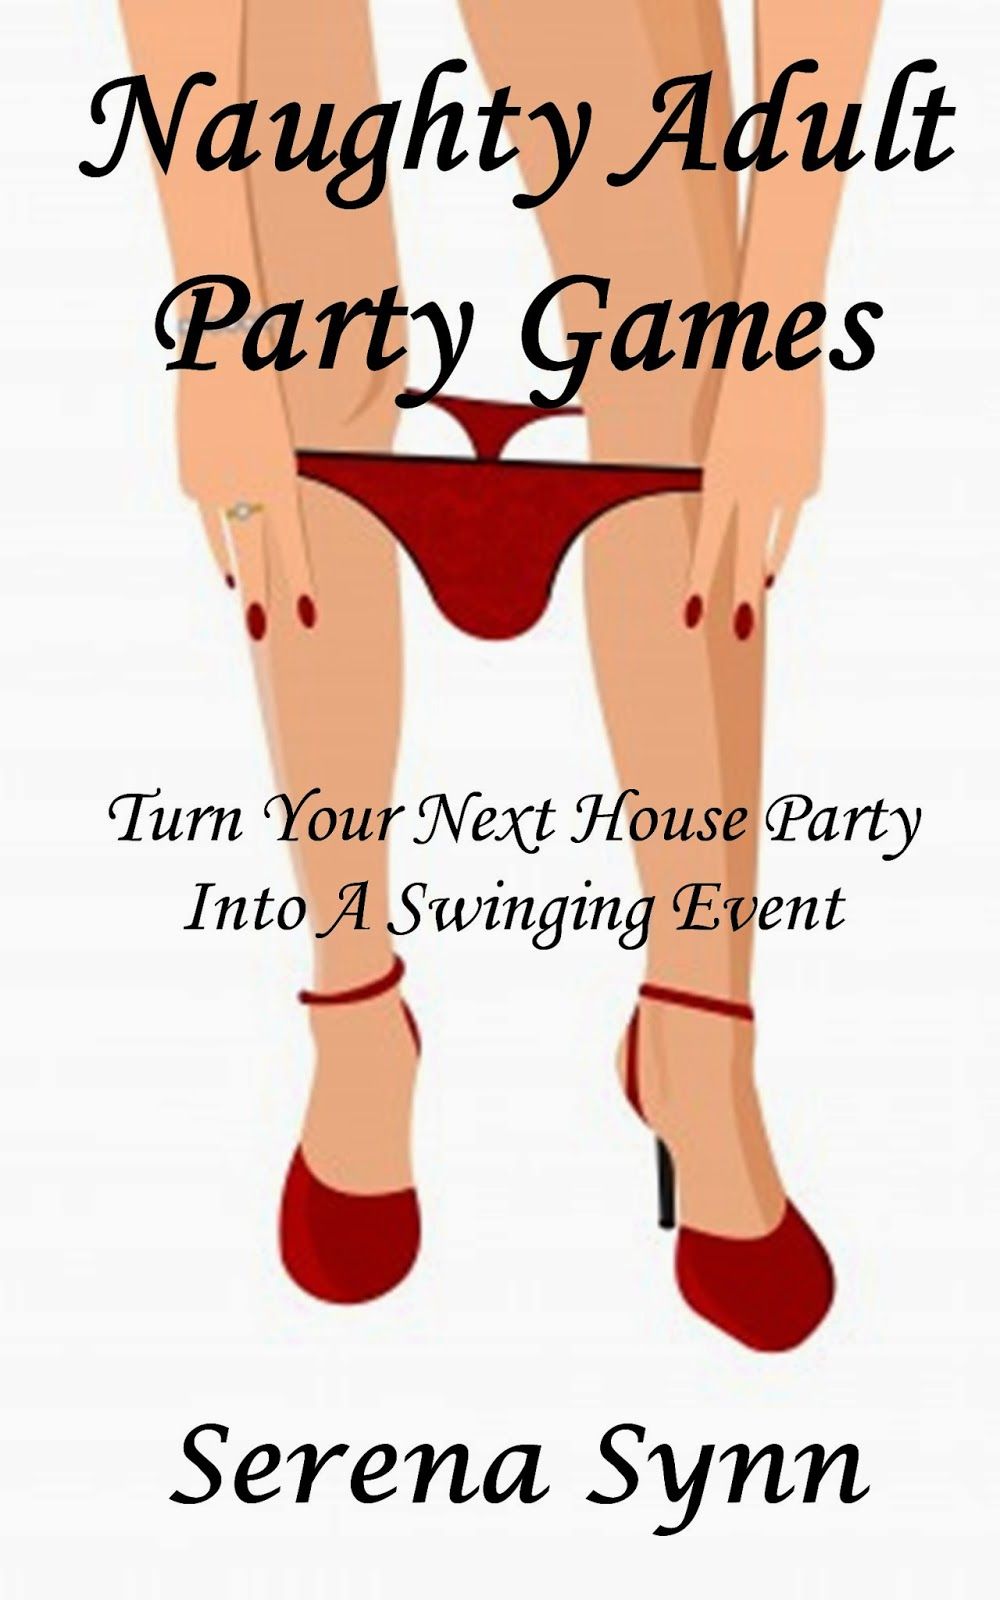 games for swingers swinger party games swinger sex games were swinging picture